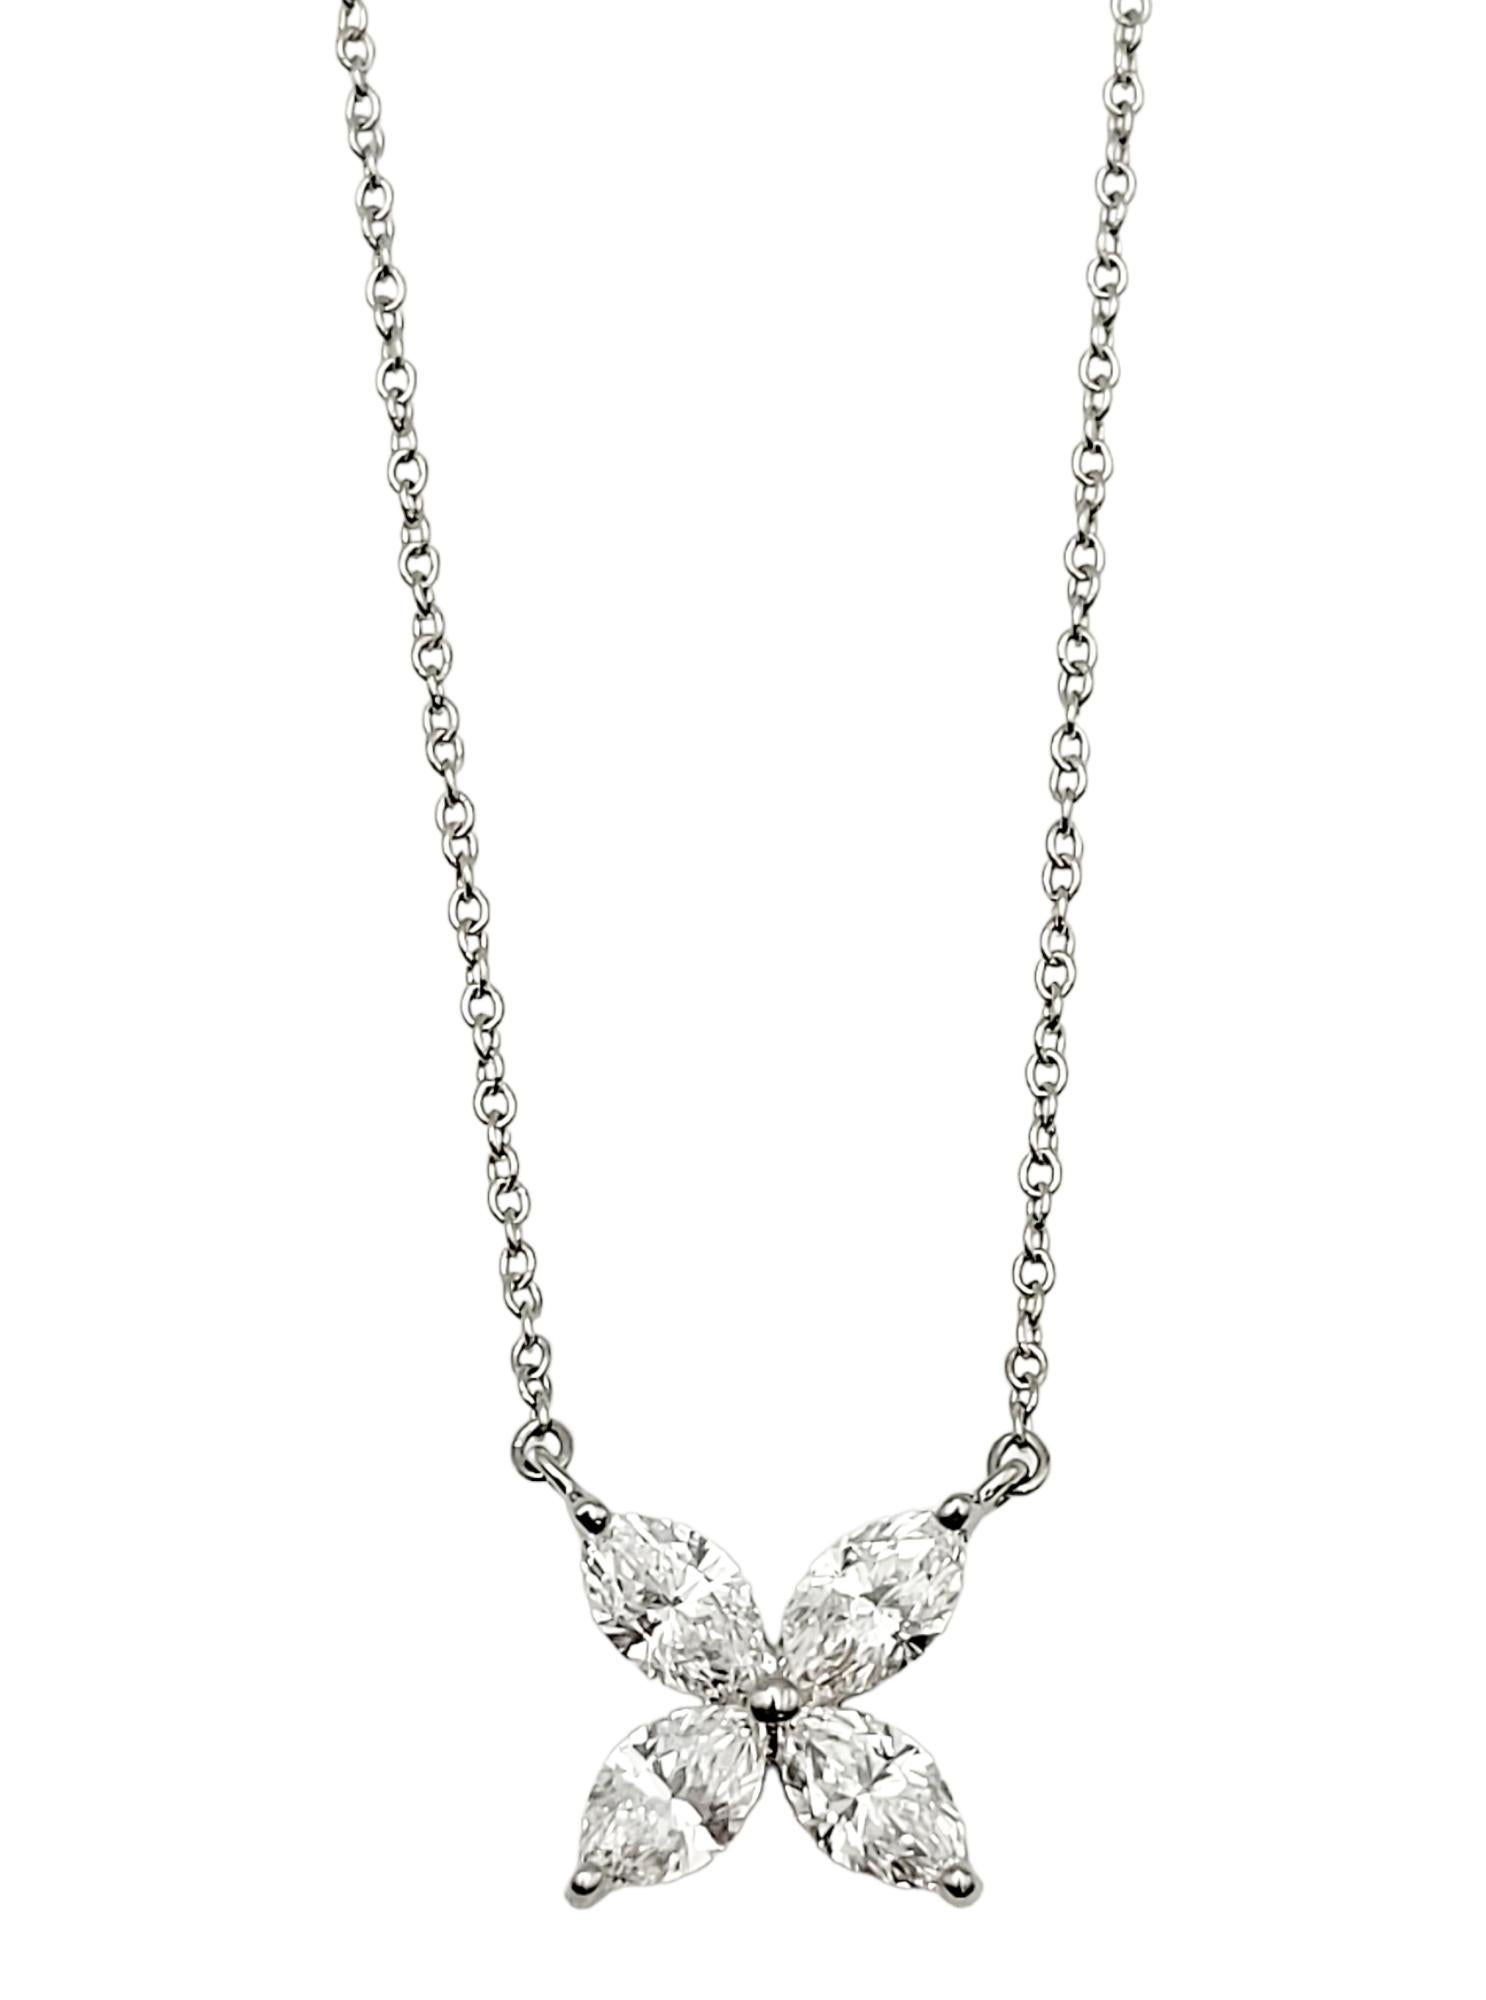 Indulge in the enchanting allure of the Tiffany Victoria Diamond Large Pendant Necklace, an exquisite piece inspired by the brilliance and luminosity of the best diamonds. Crafted with utmost precision, this necklace features a unique marquise cut